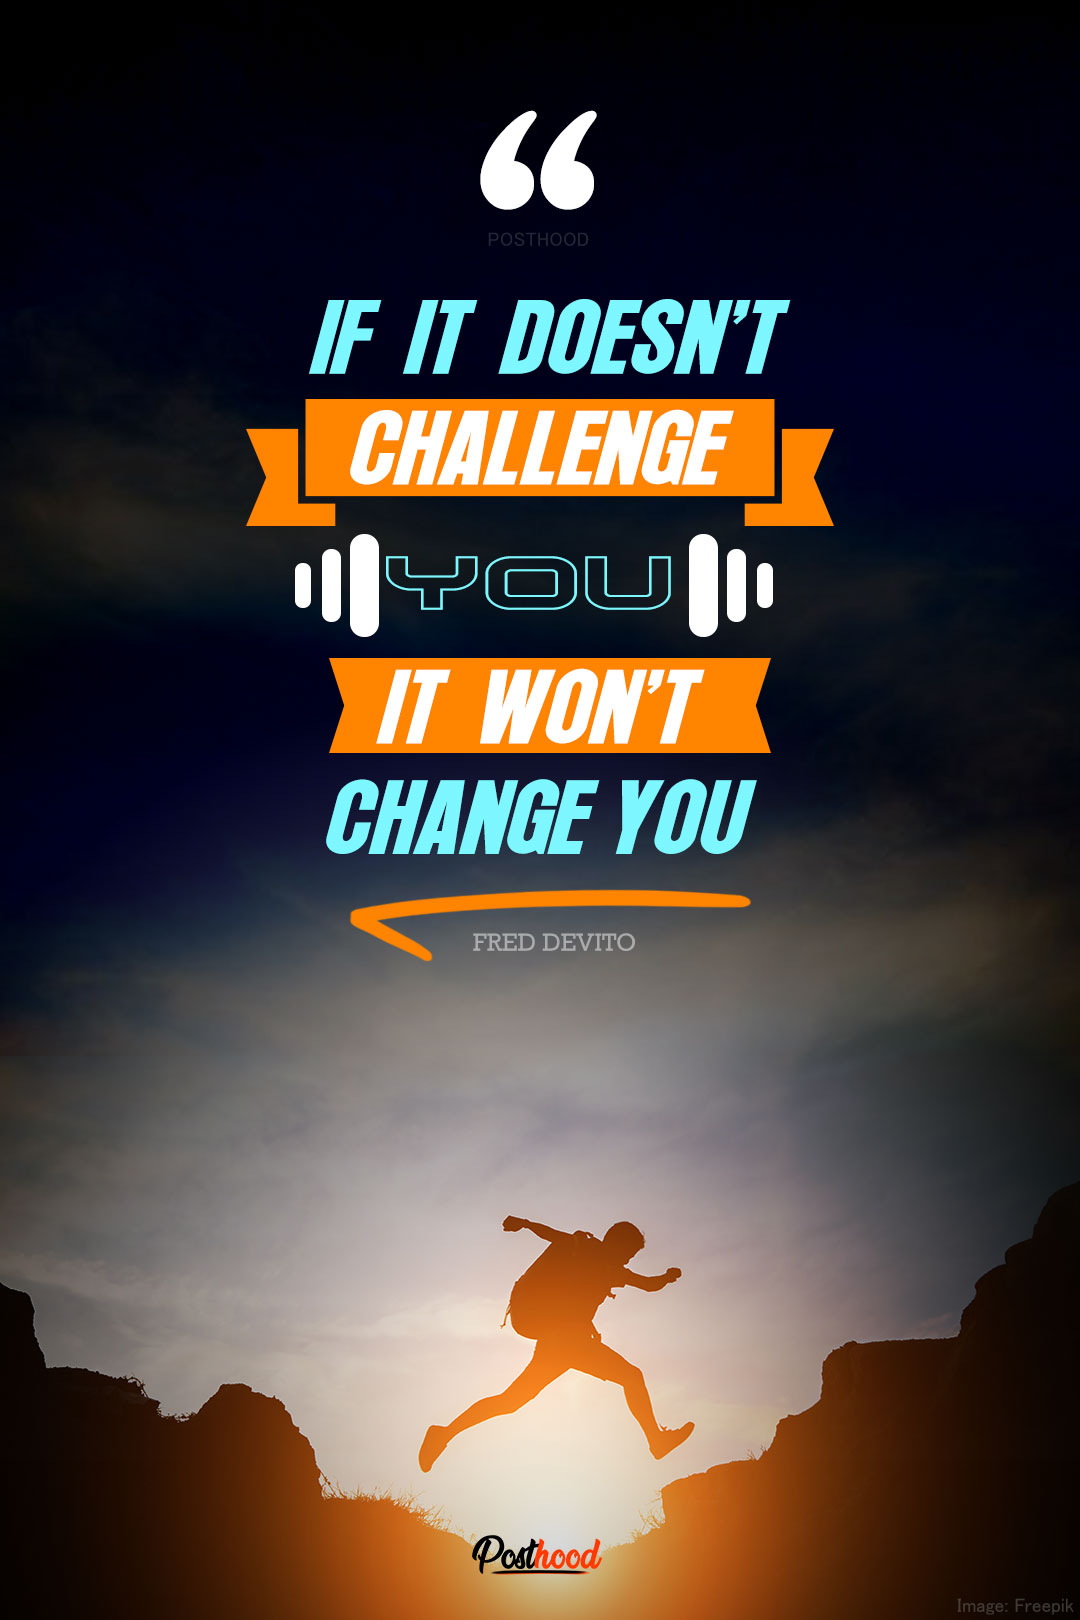 Fitness quotes wallpapers for mobile, Motivational fitness workout quotes, iPhone Fitness wallpaper.